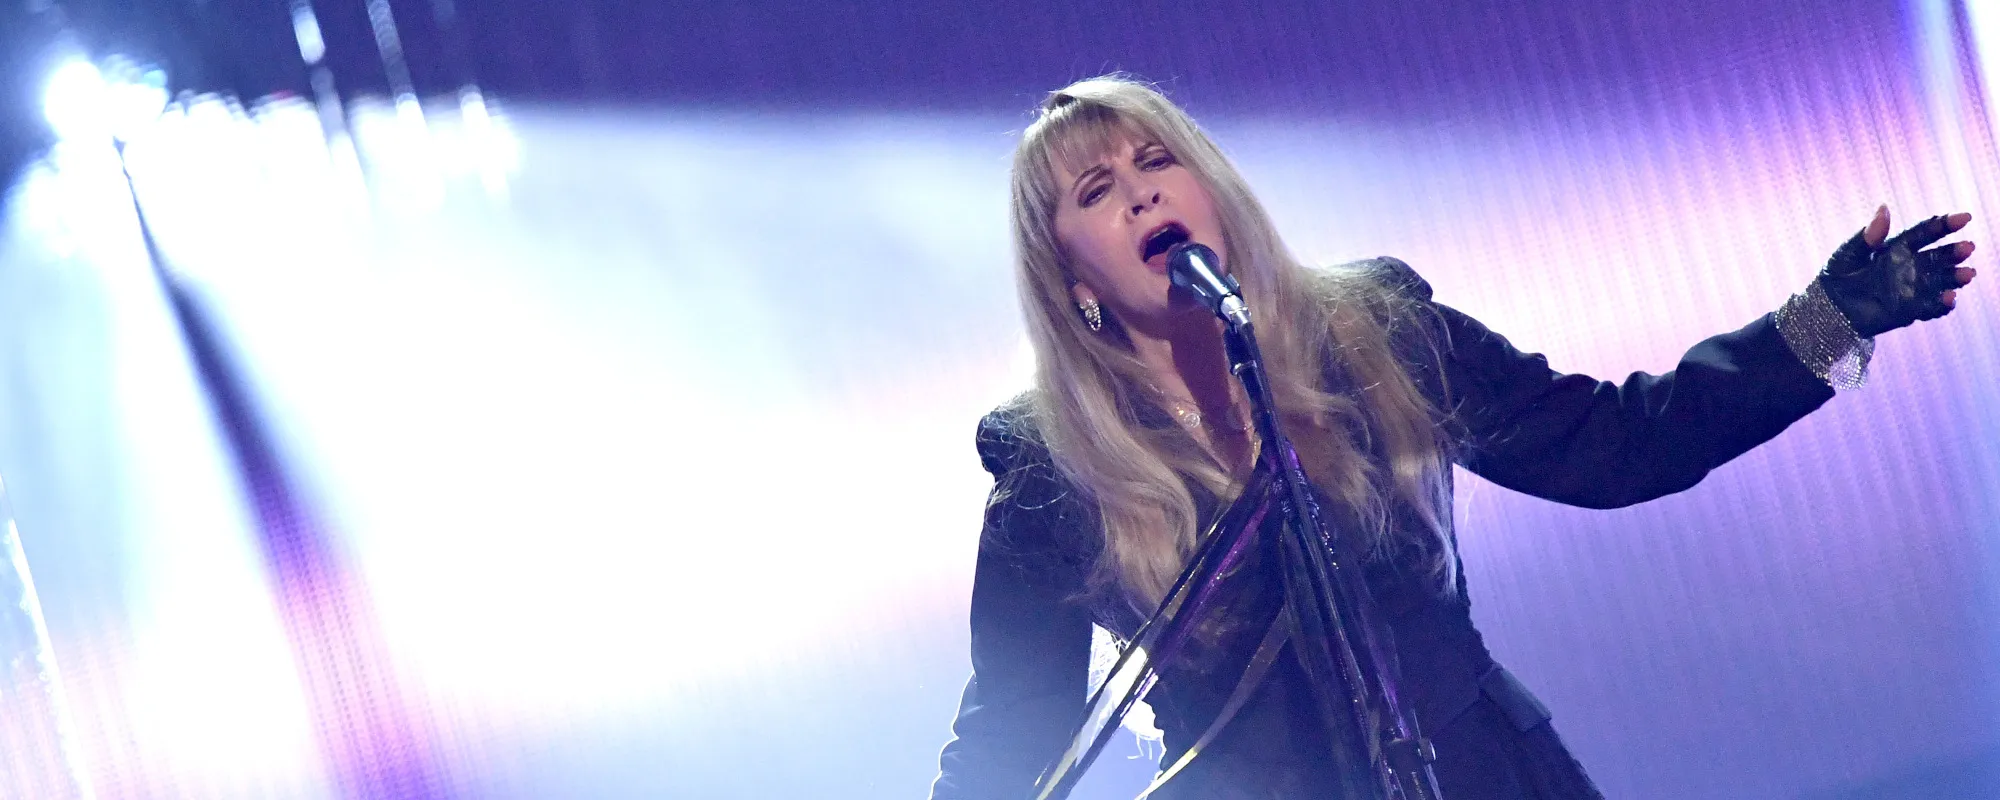 The Meaning Behind “If Anyone Falls” by Stevie Nicks and the “Real Rock and Roller” Who Sparked Its Deep Emotion